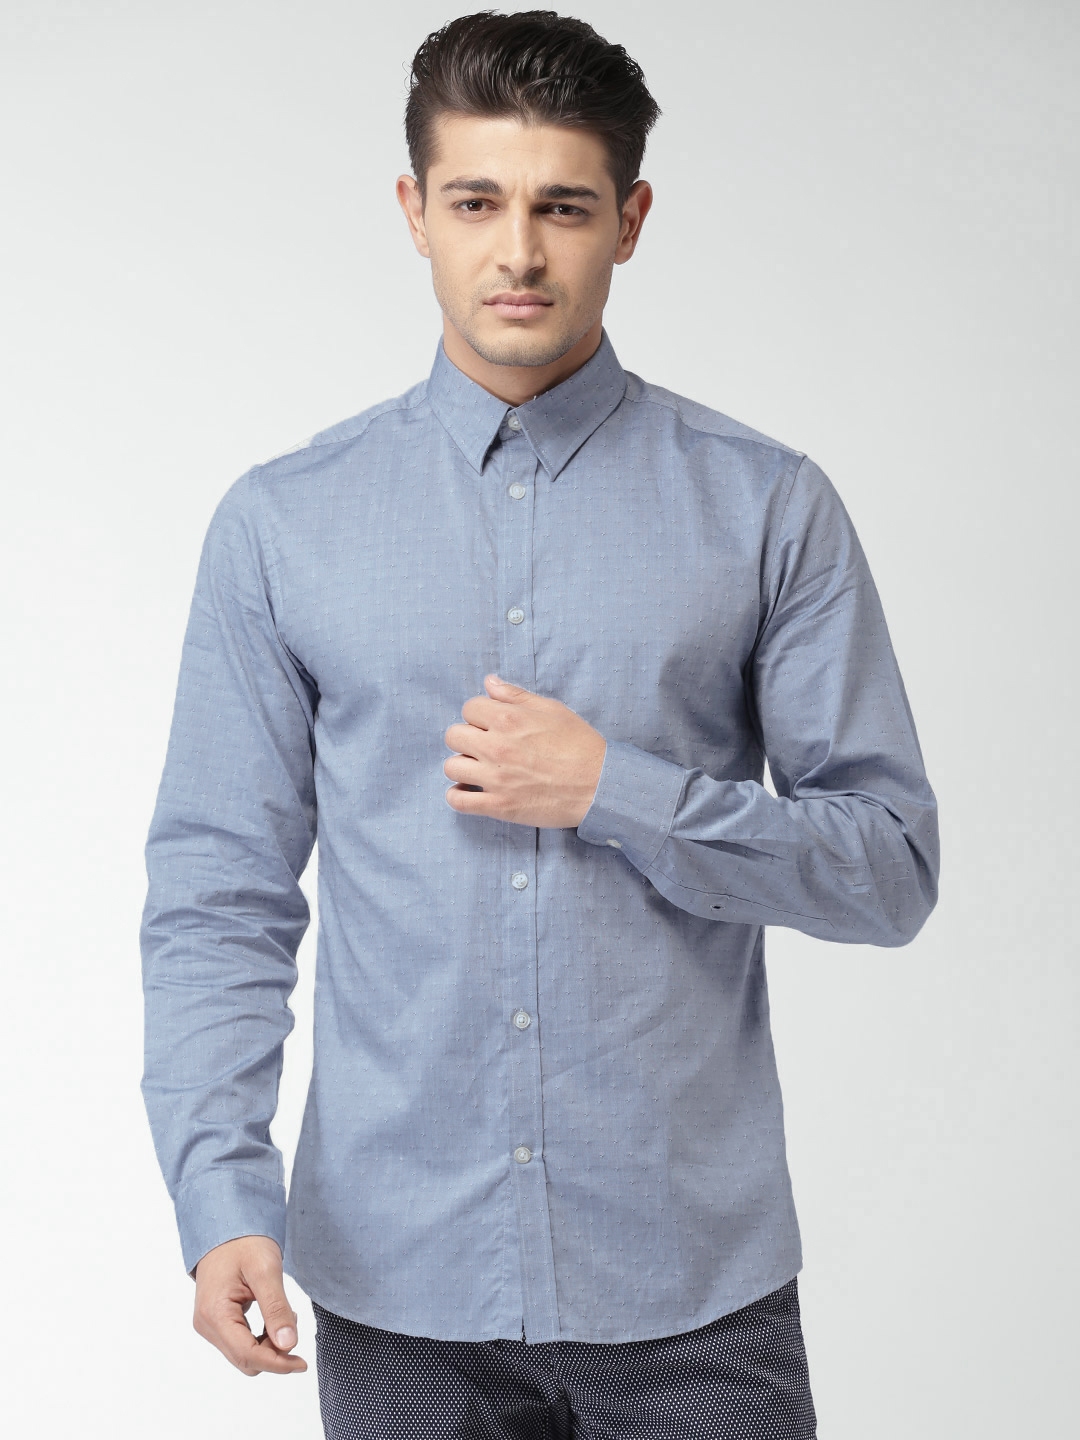 Buy SELECTED Blue Slim Fit Casual Shirt - Shirts for Men 1428771 | Myntra